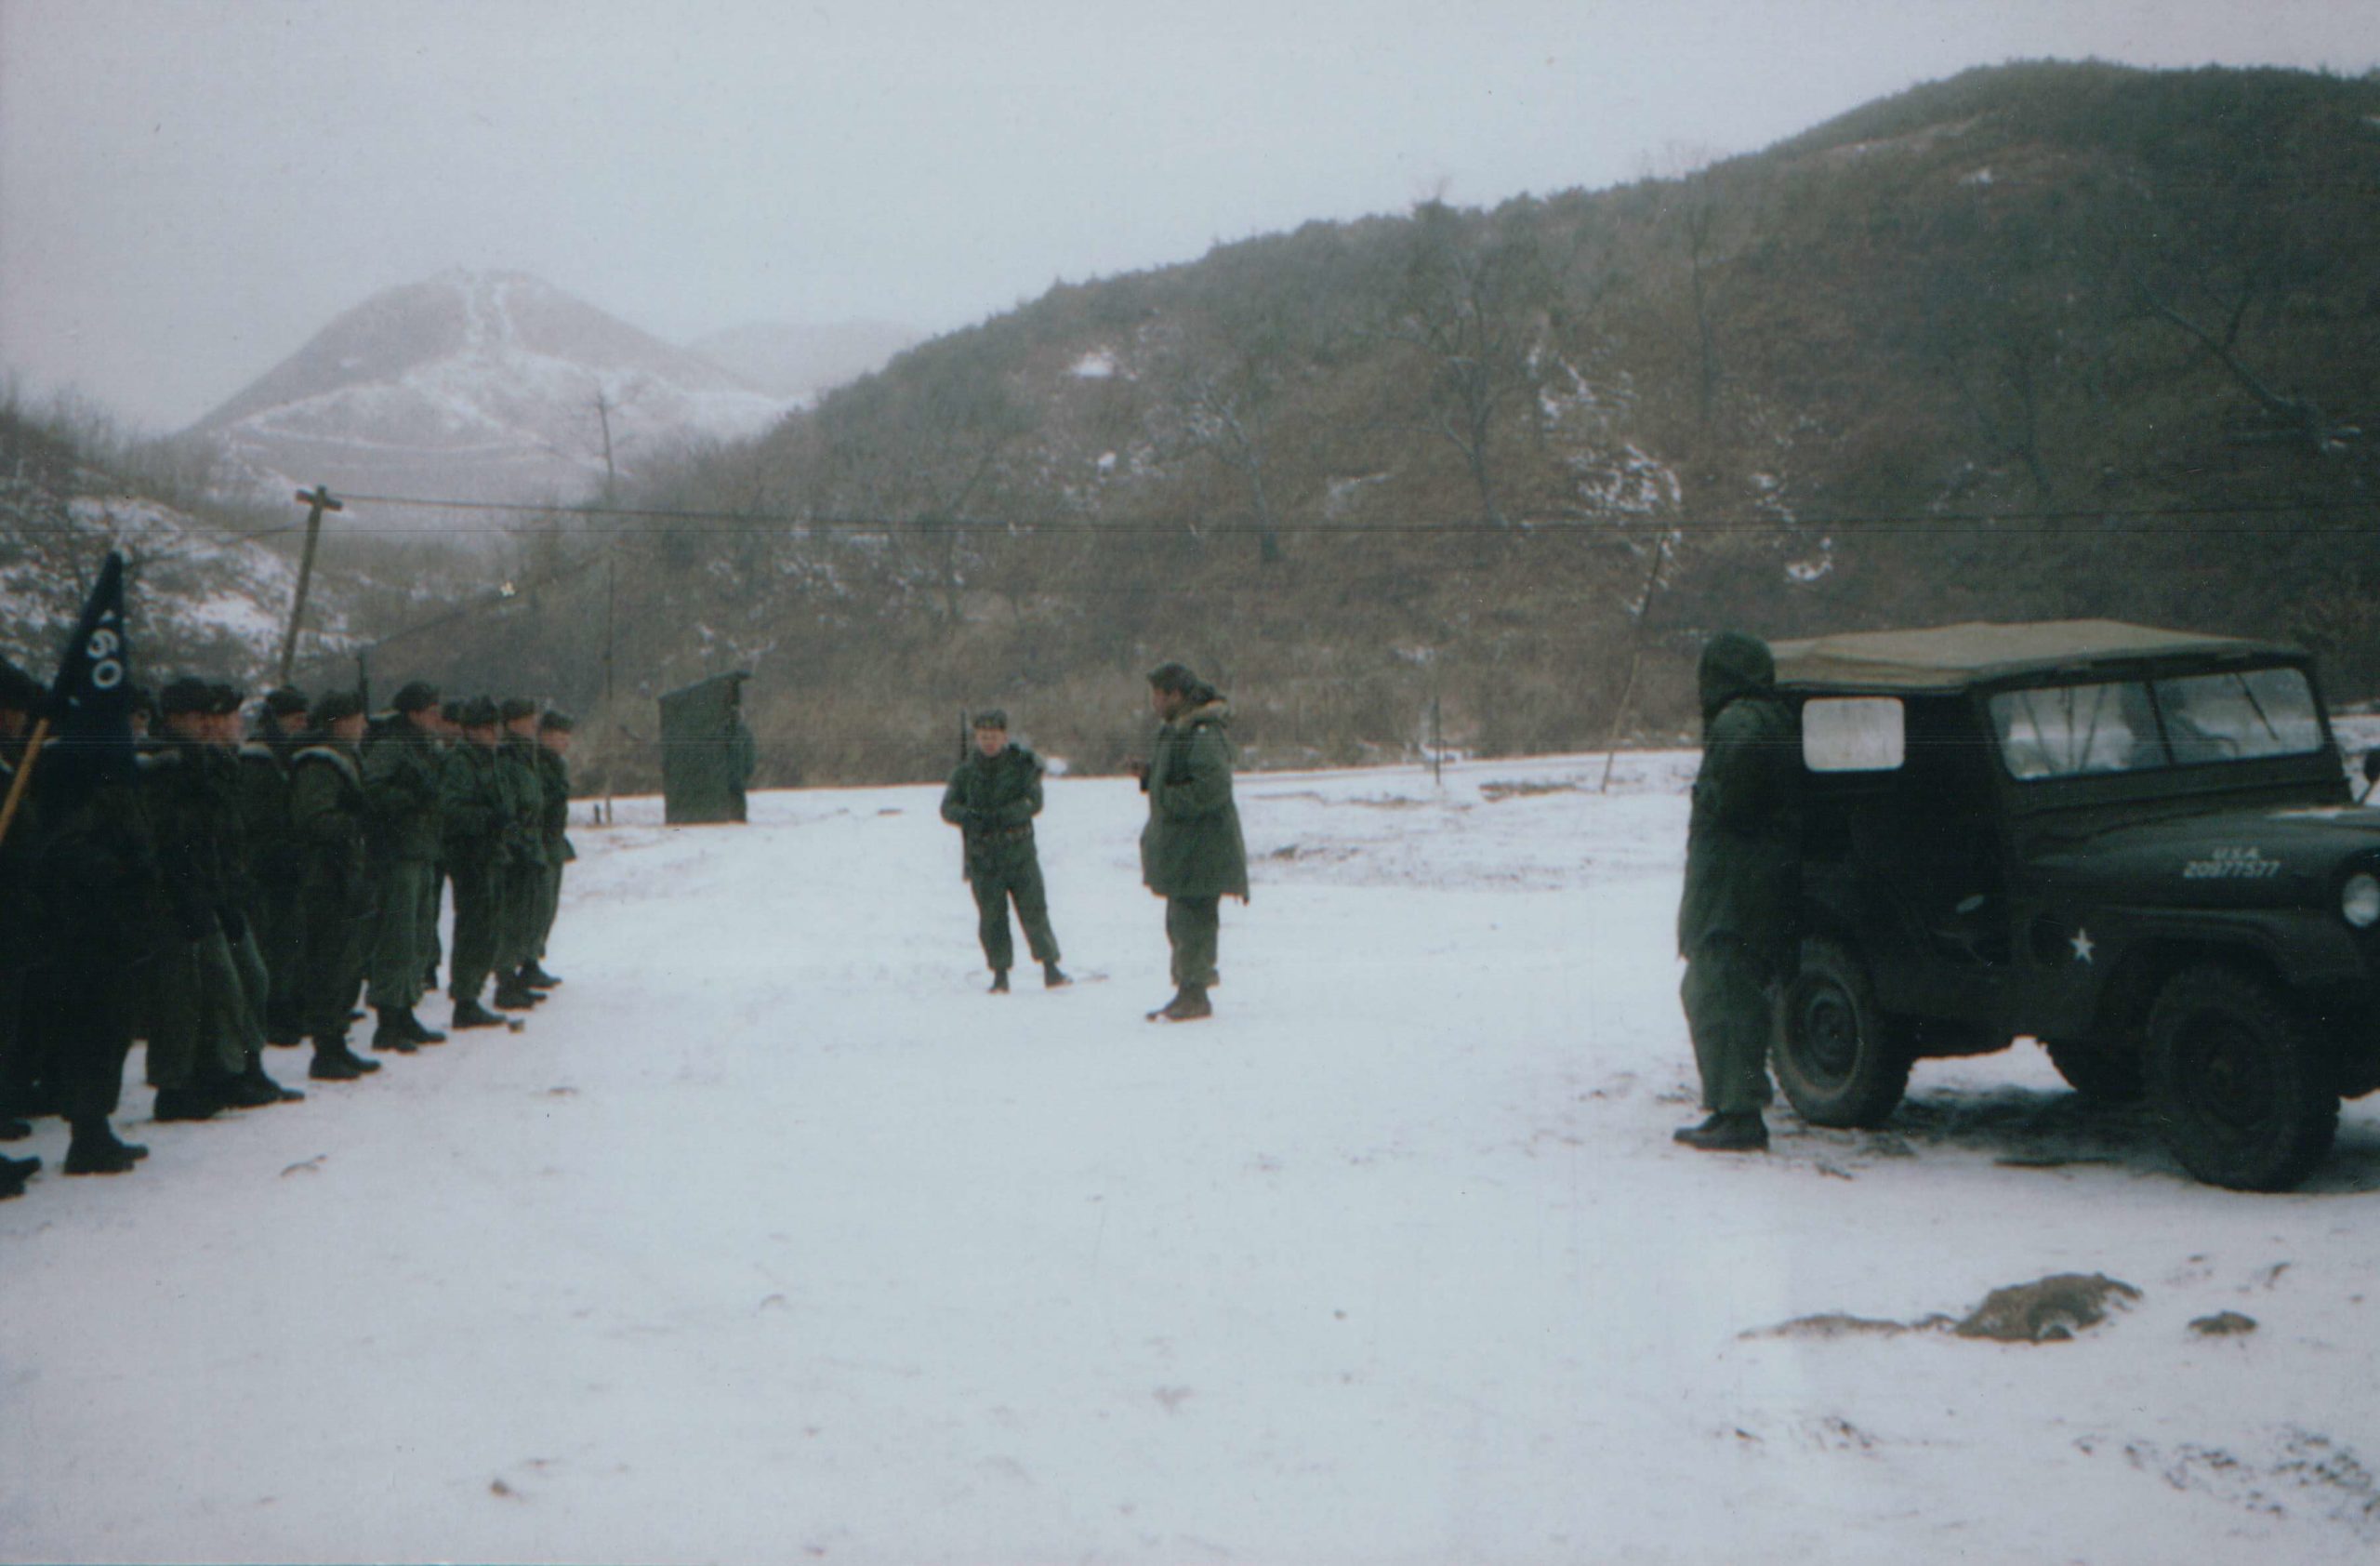 The 160th Infantry Regiment- H Company in rotation- return to DMZ after ceasefire. Taken in 1953-1954.